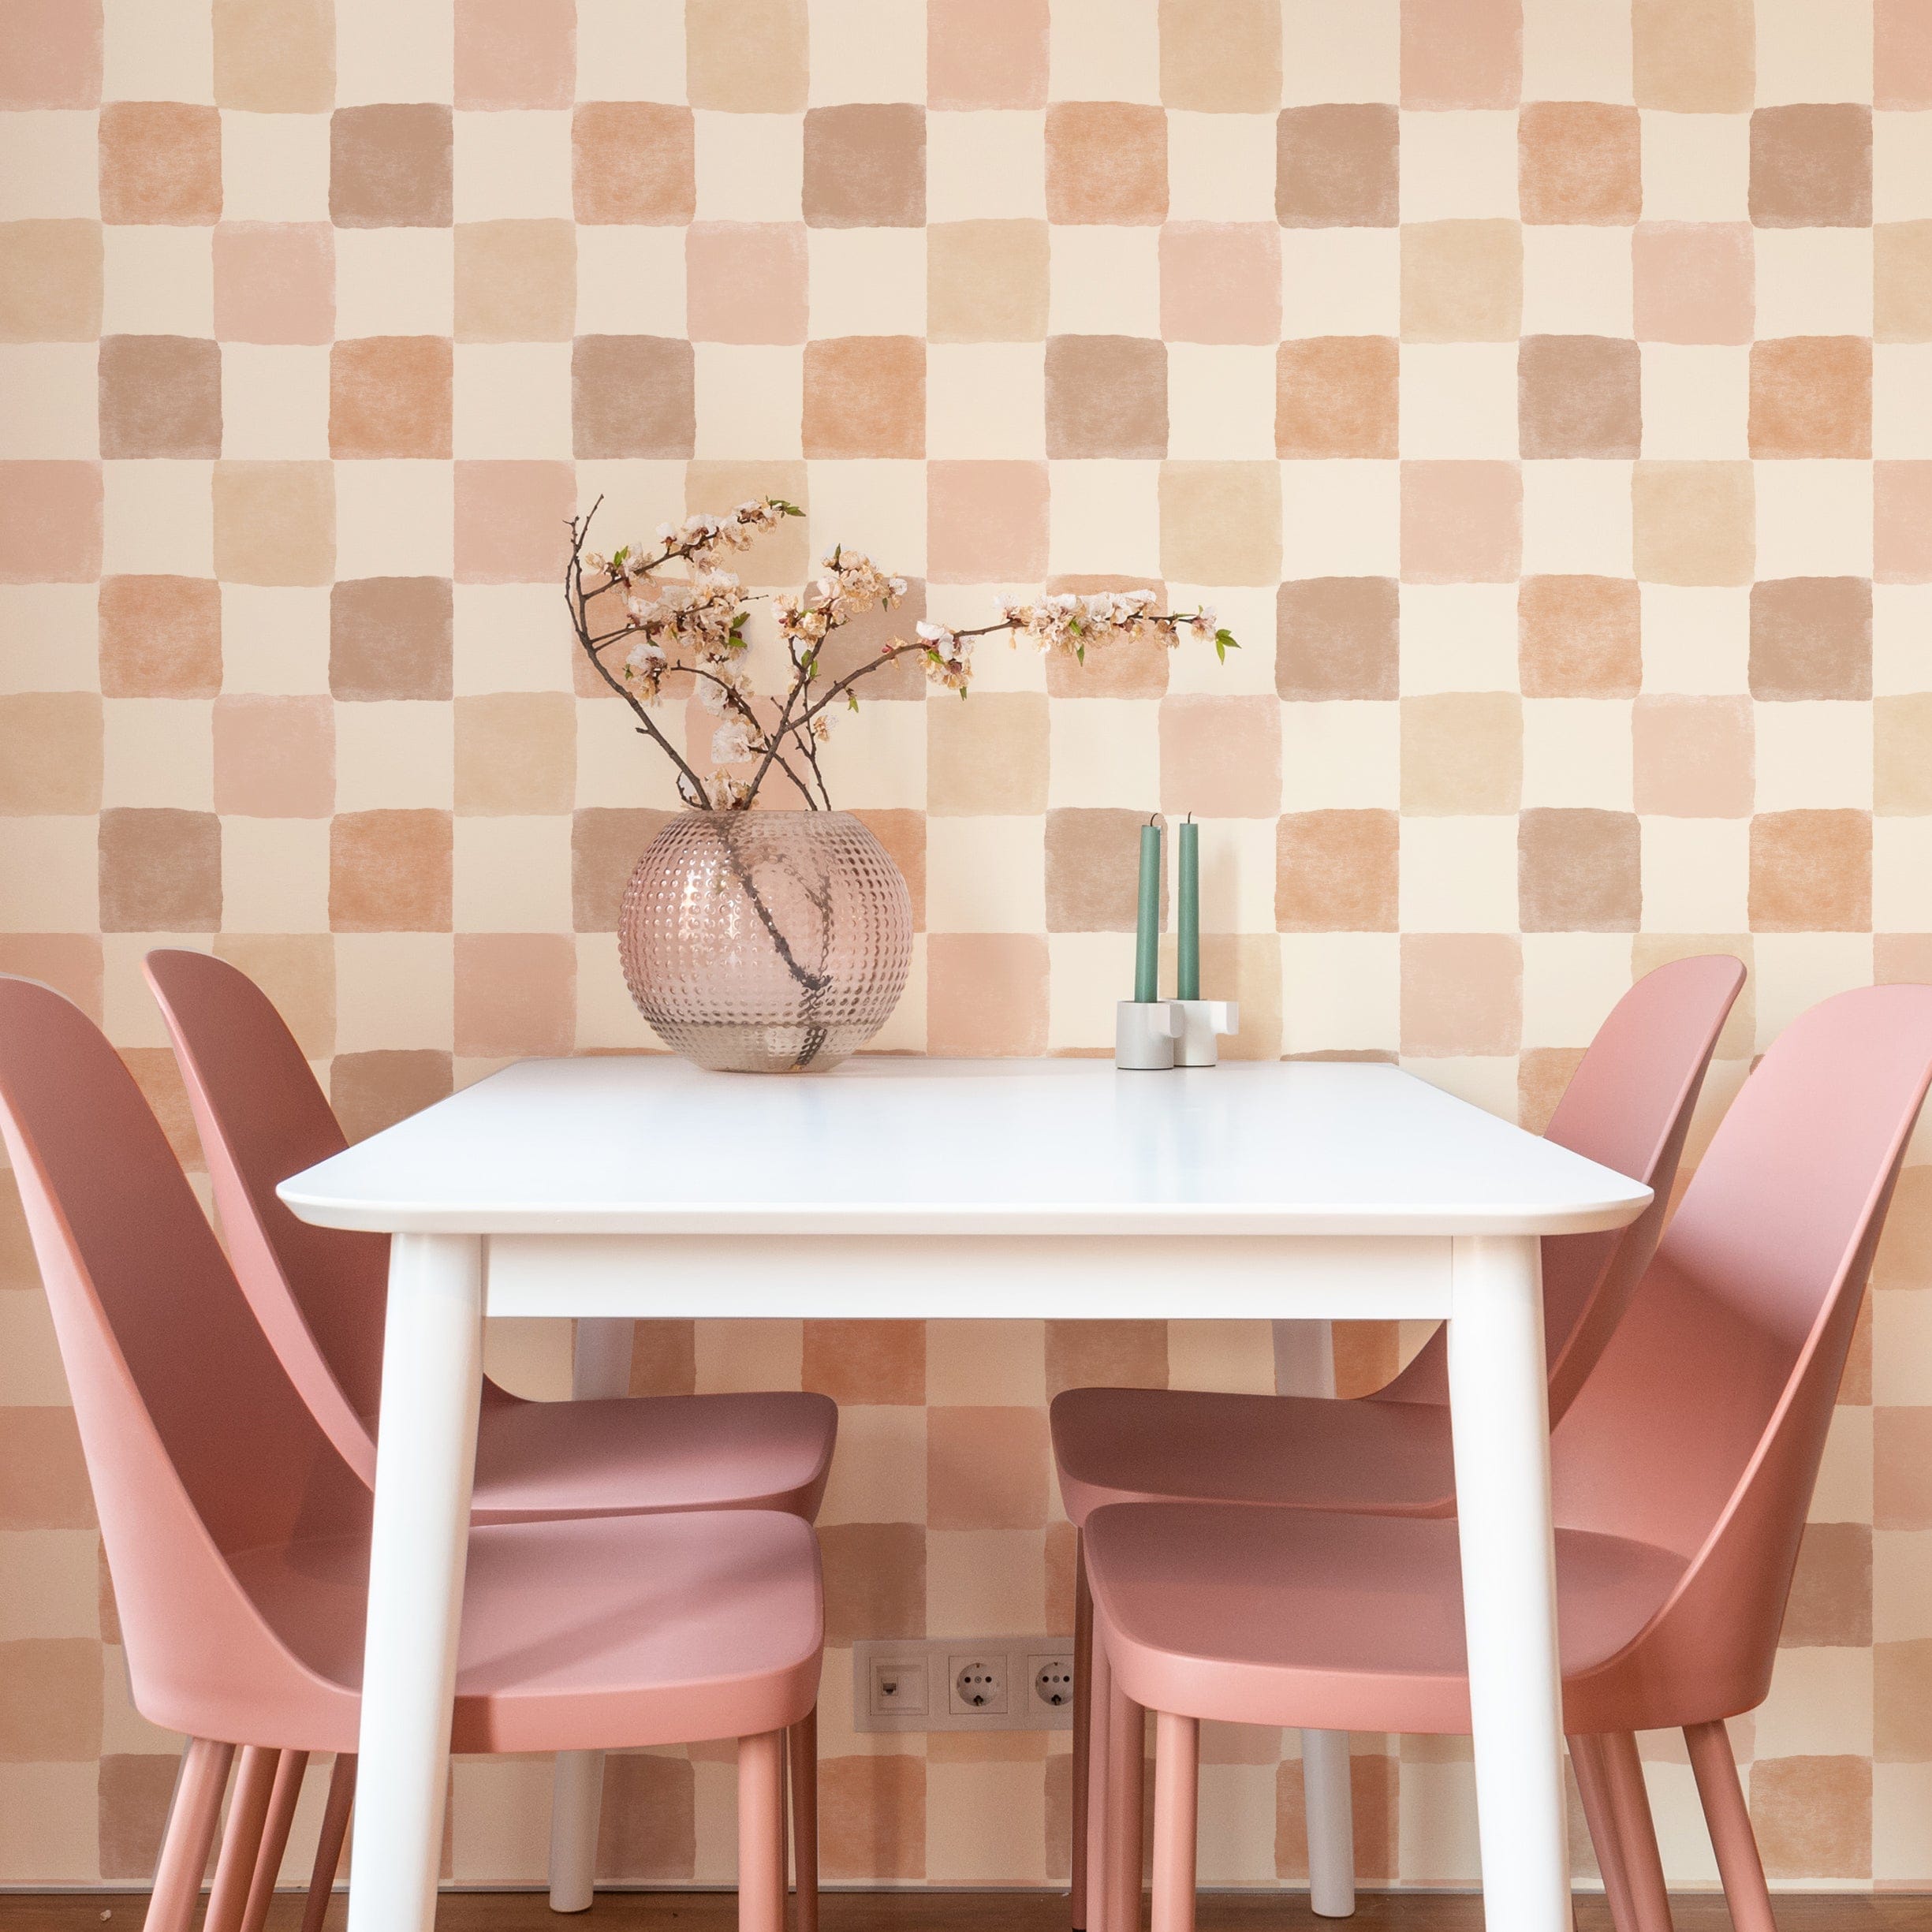 Clémence Wallpaper in a modern dining area, enhancing the space with its soothing checkered pattern of peach, taupe, and beige squares. The wallpaper pairs beautifully with pink dining chairs and a simple white table, creating a chic and cozy ambiance